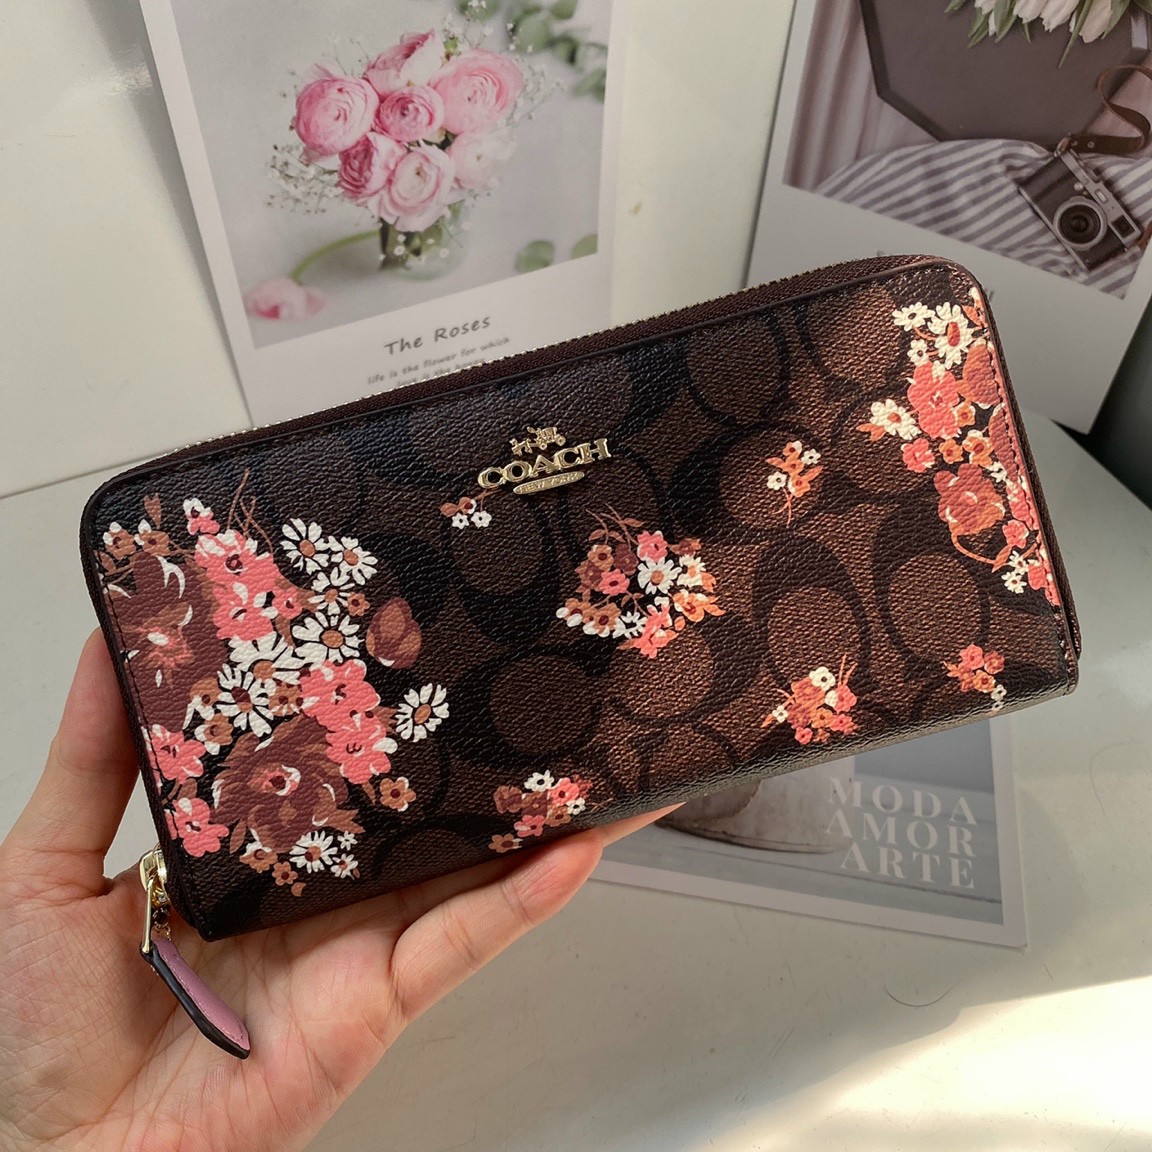 VÍ NỮ DÀI IN HOA COACH ACCORDION ZIP WALLET IN SIGNATURE CANVAS WITH MEDLEY BOUQUET PRINT 9